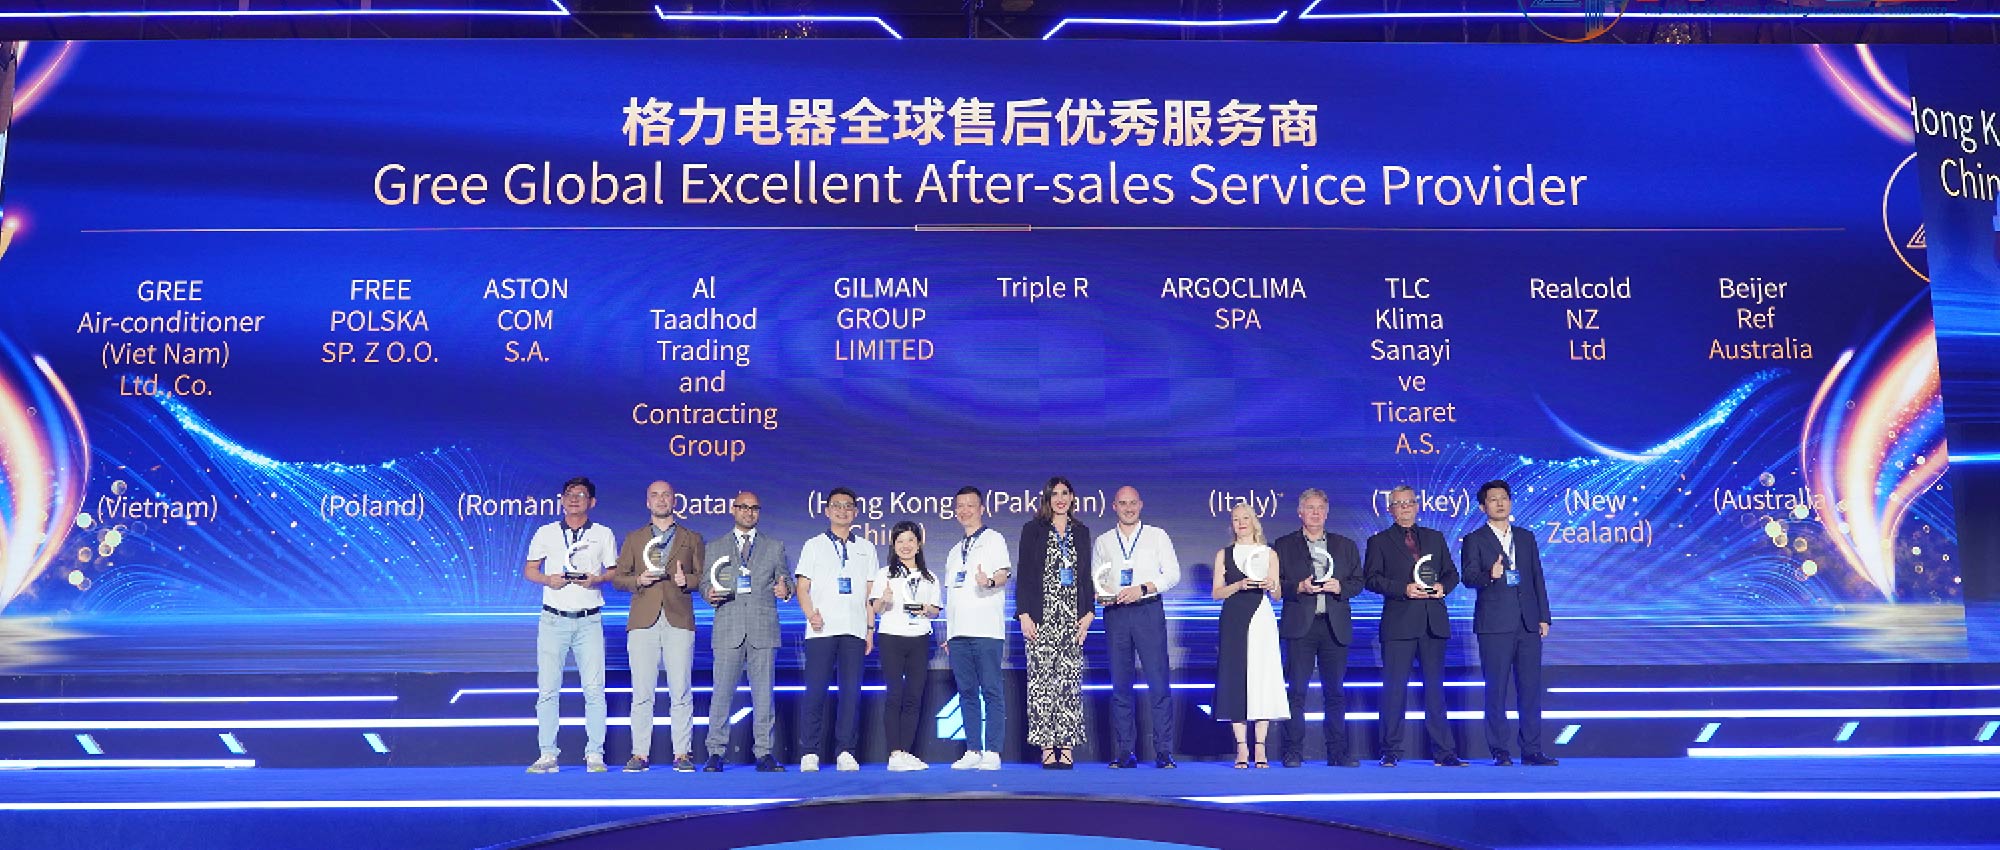 Realcold won the Gree Global Excellent After-sales Service Provider Award